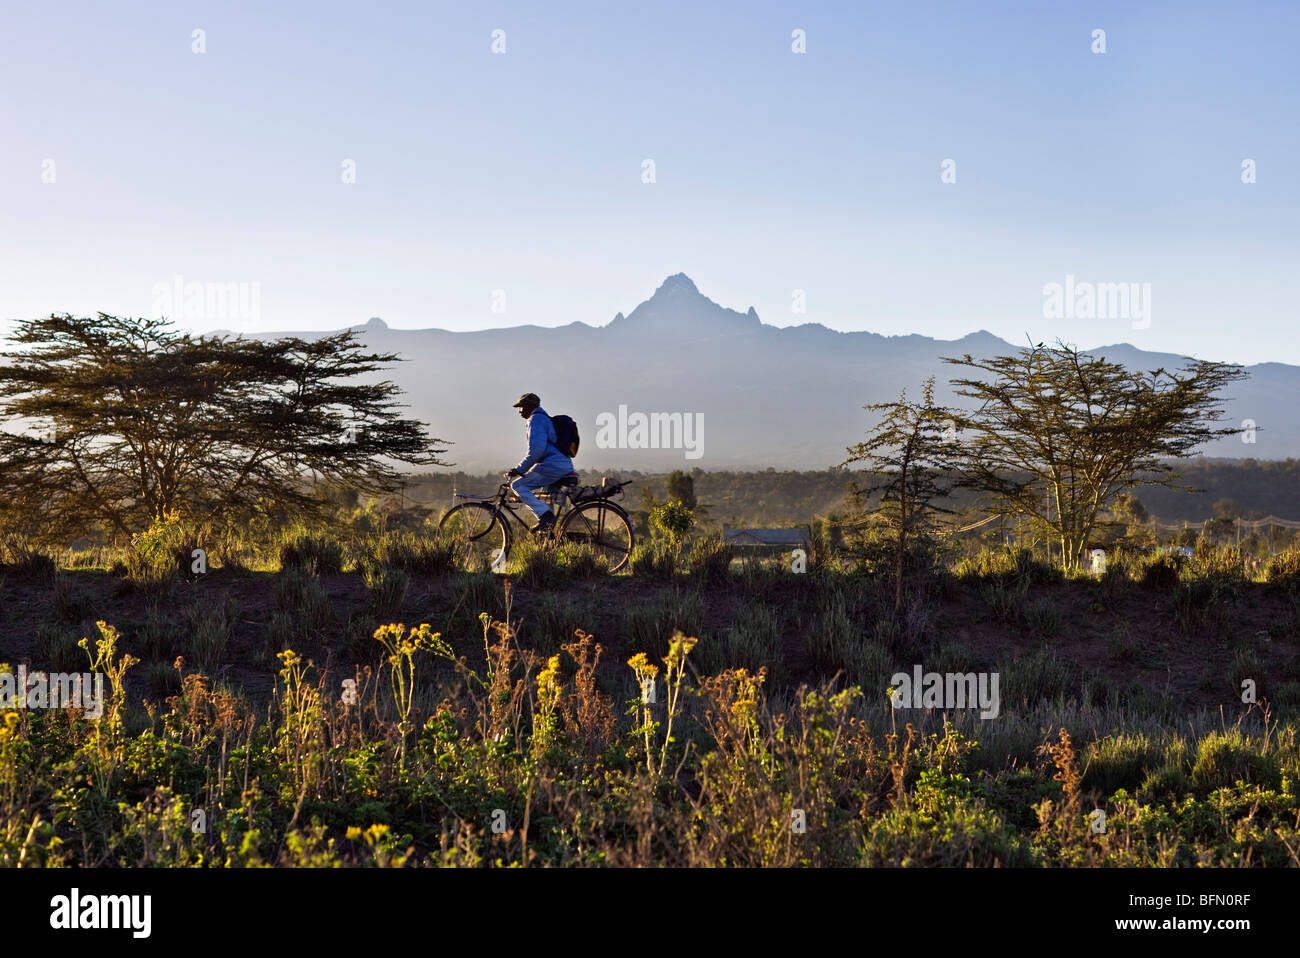 Kenya,Timau. In the early morning, a man cycles to work with Mount Kenya towering in the background. Stock Photo